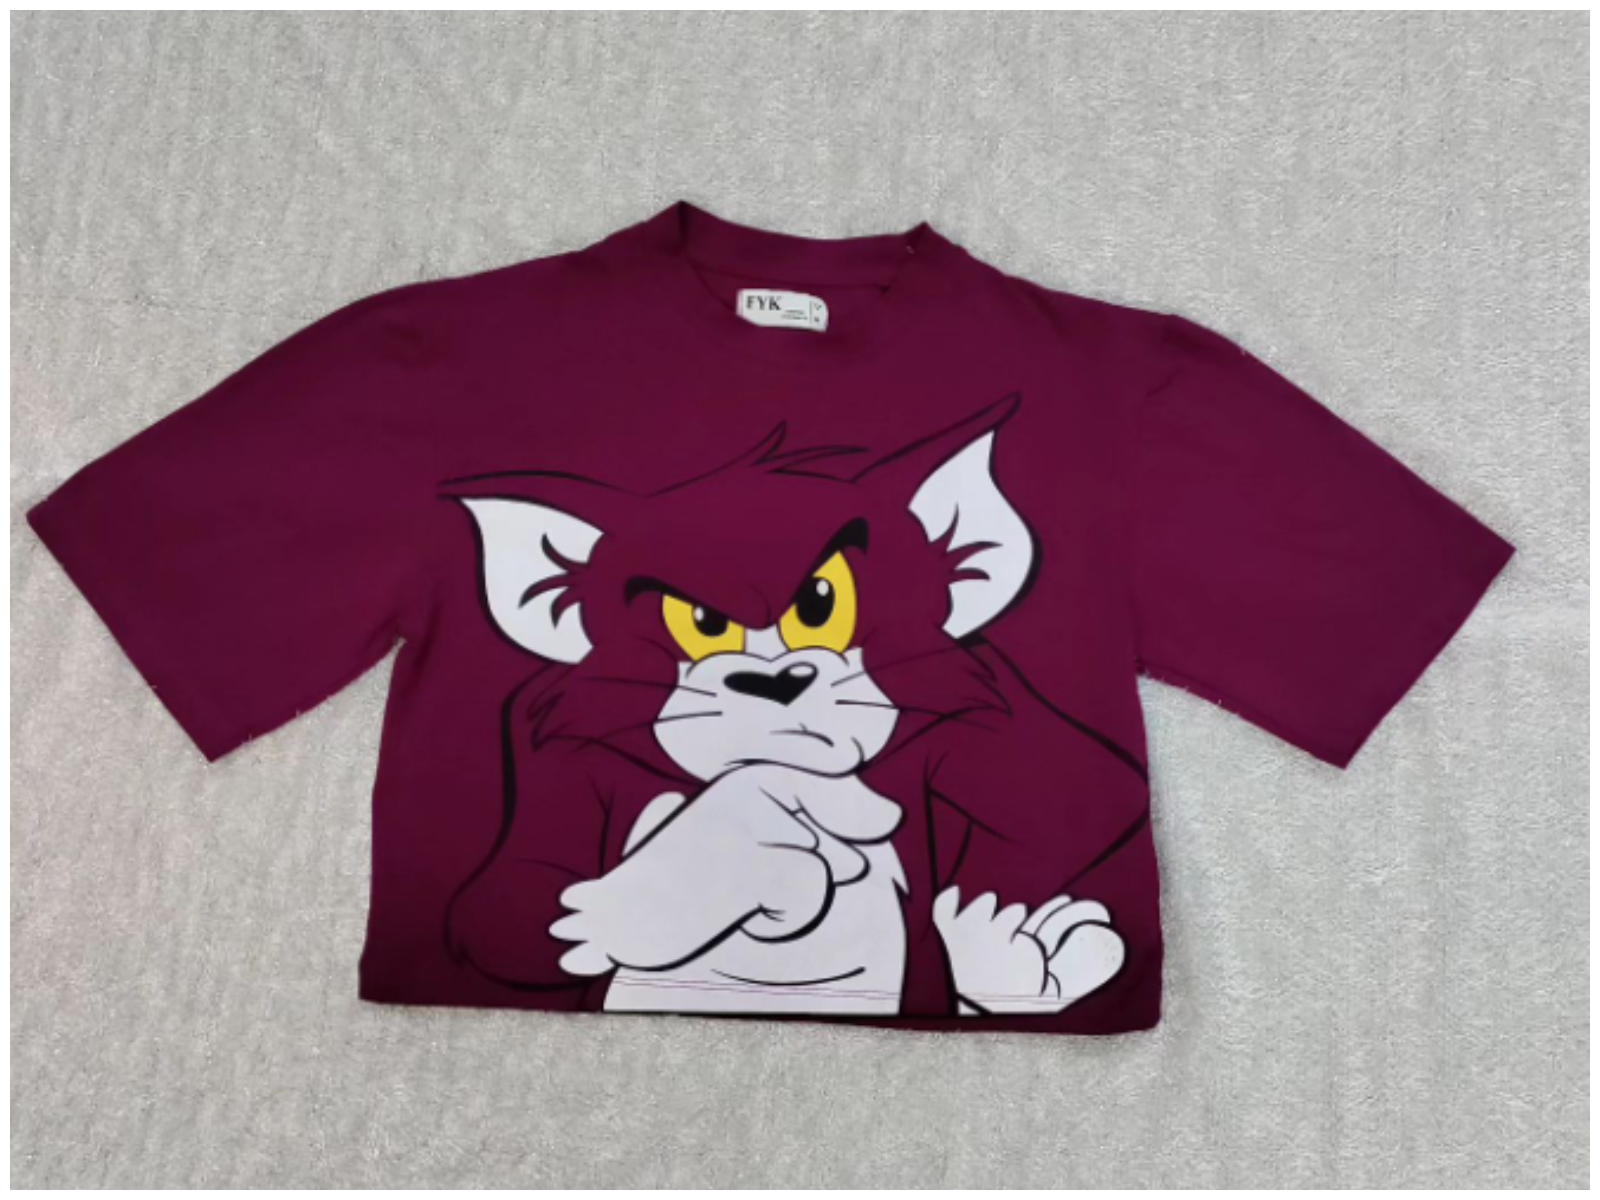 A maroon Mickey Mouse graphic top.